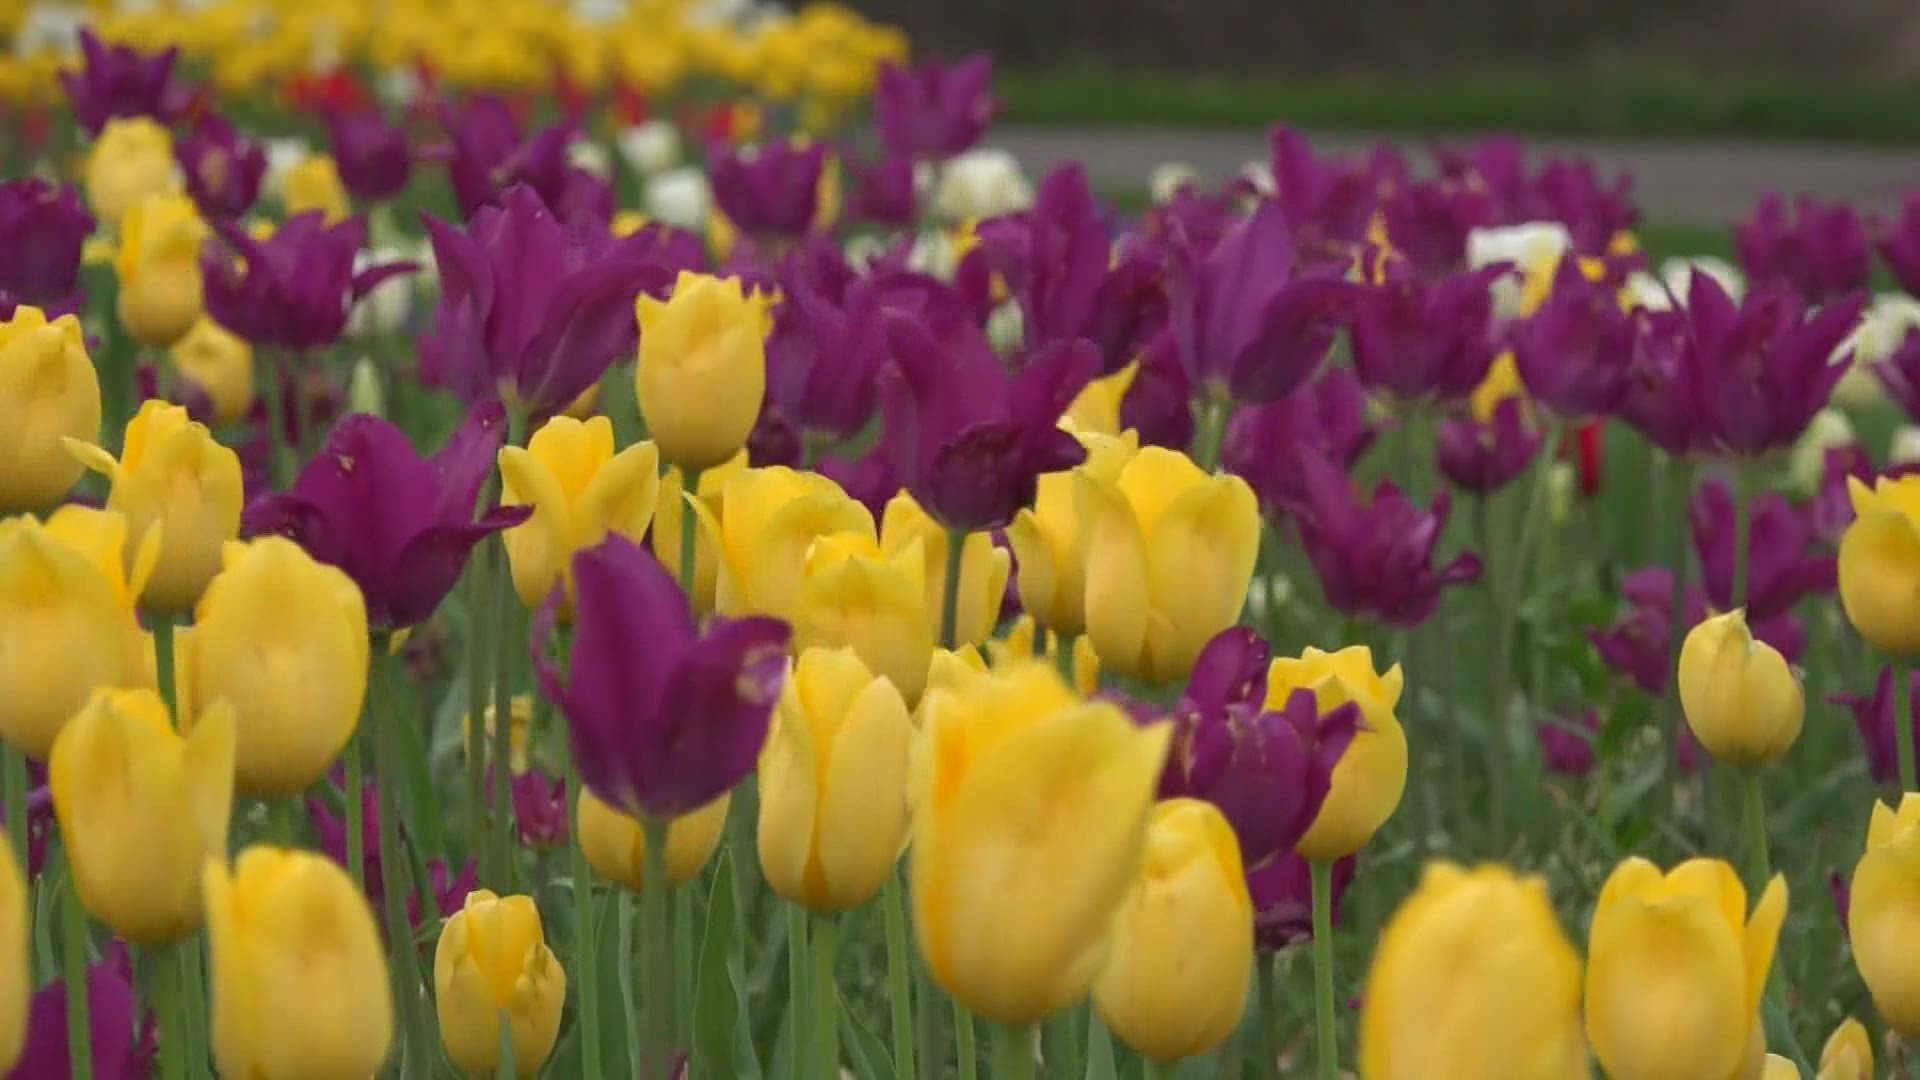 Organizers 'optimistic' that Tulip Time 2021 will go on with changes in place